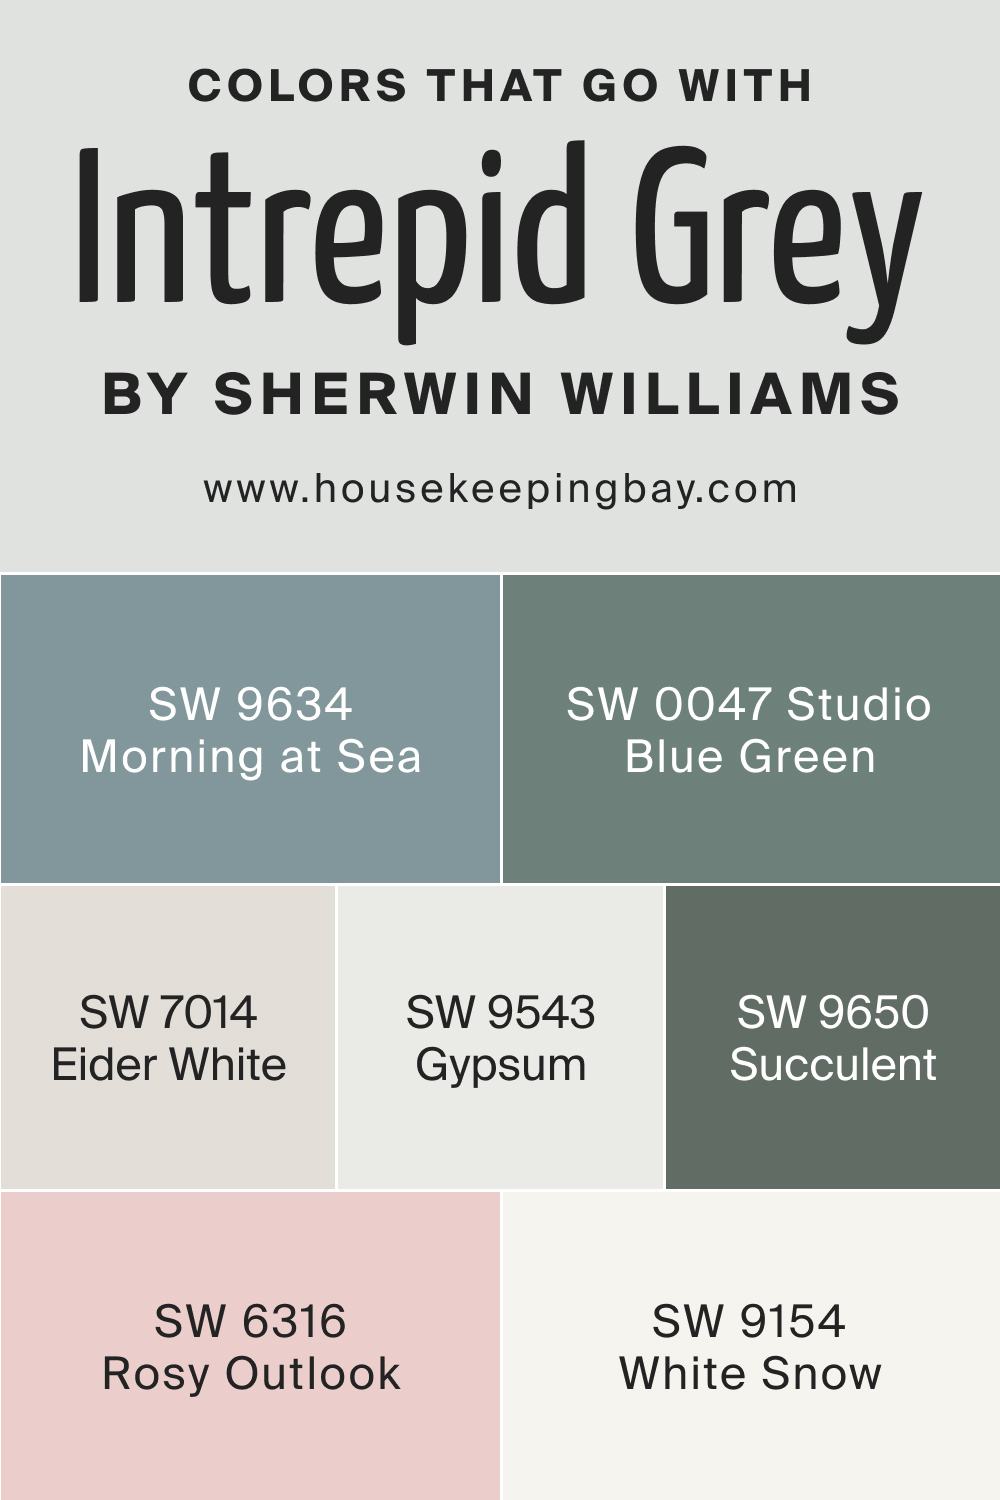 Colors that goes with SW 9556 Intrepid Grey by Sherwin Williams